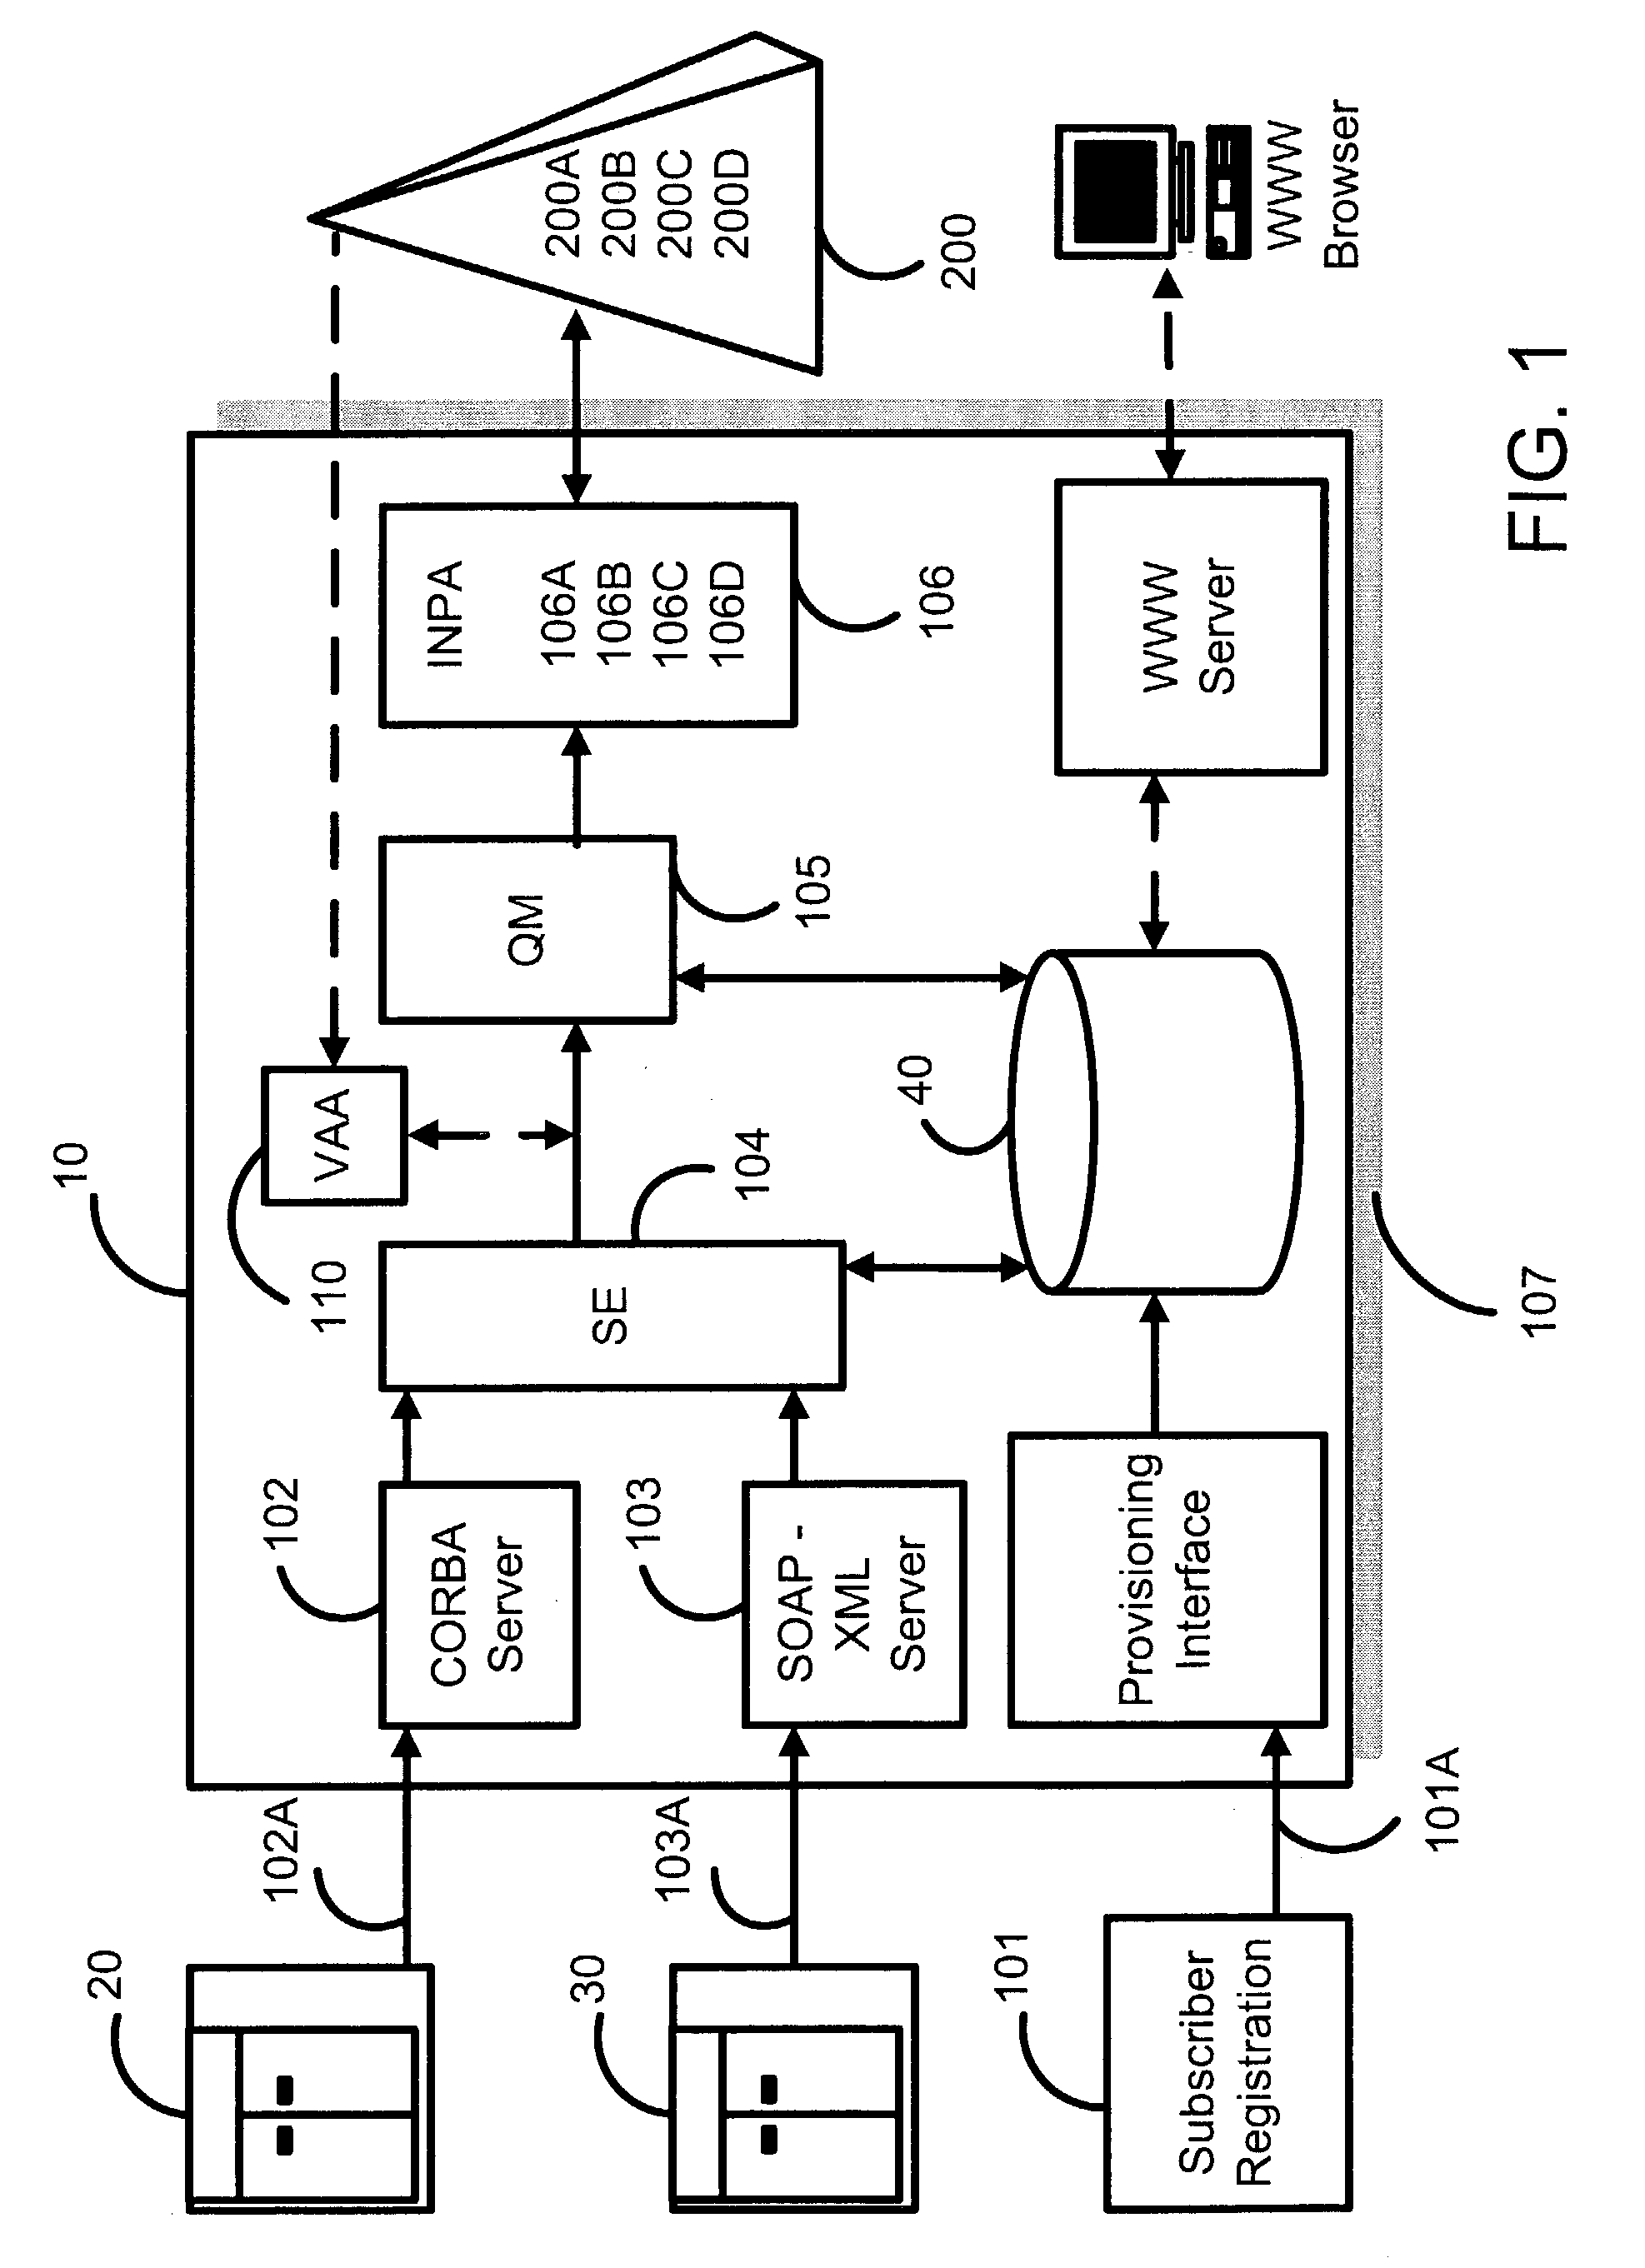 Method for implementing an Open Charging (OC) middleware platform and gateway system